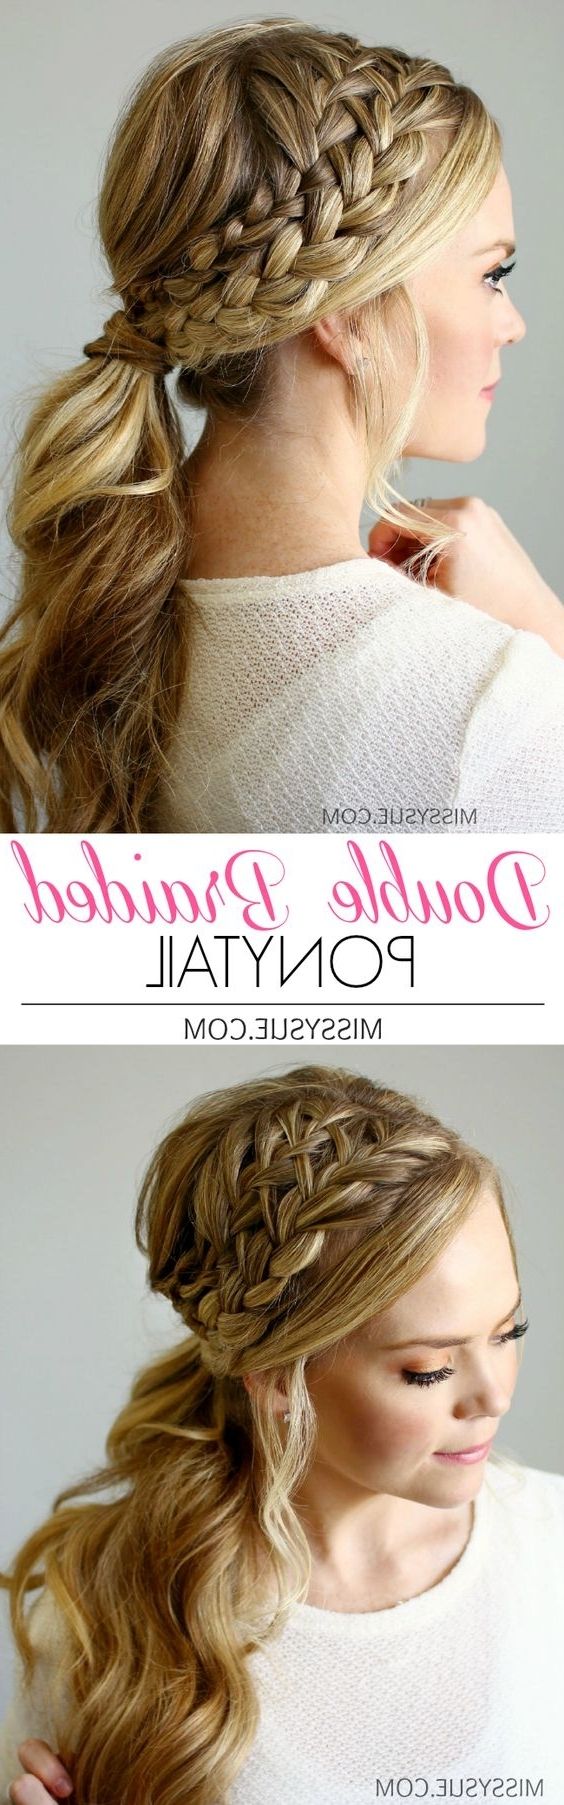 Trendy Pony Hairstyles With Textured Braid Intended For 30 Simple Easy Ponytail Hairstyles For Lazy Girls – Ponytail Ideas  (View 10 of 20)